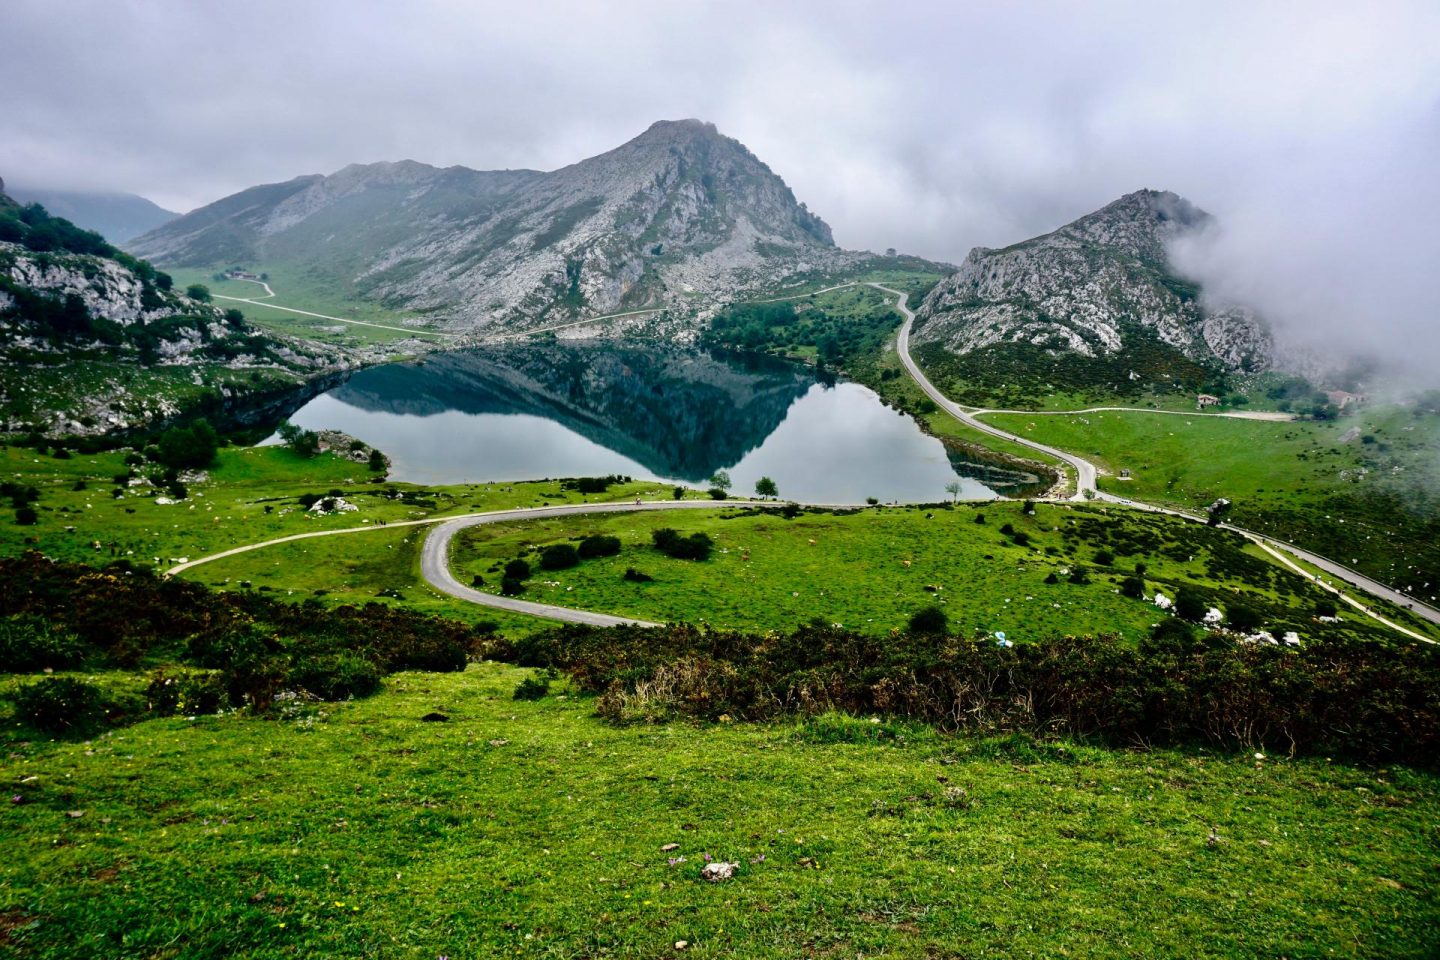 Wild Spain: Six reasons to go hiking in the Picos de Europa National Park